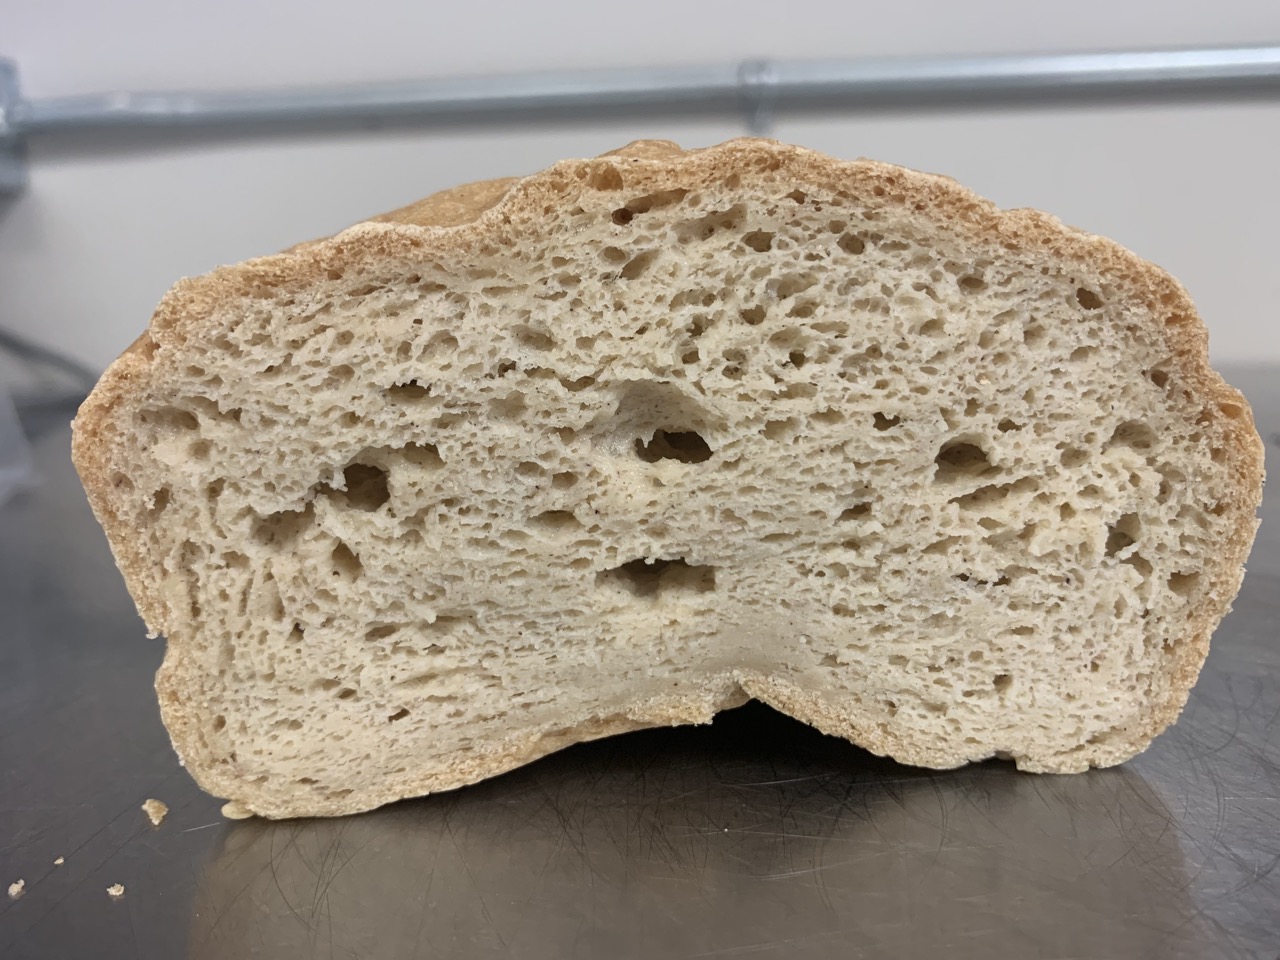 A close up of the inside of Brad's gluten free crusty bread.